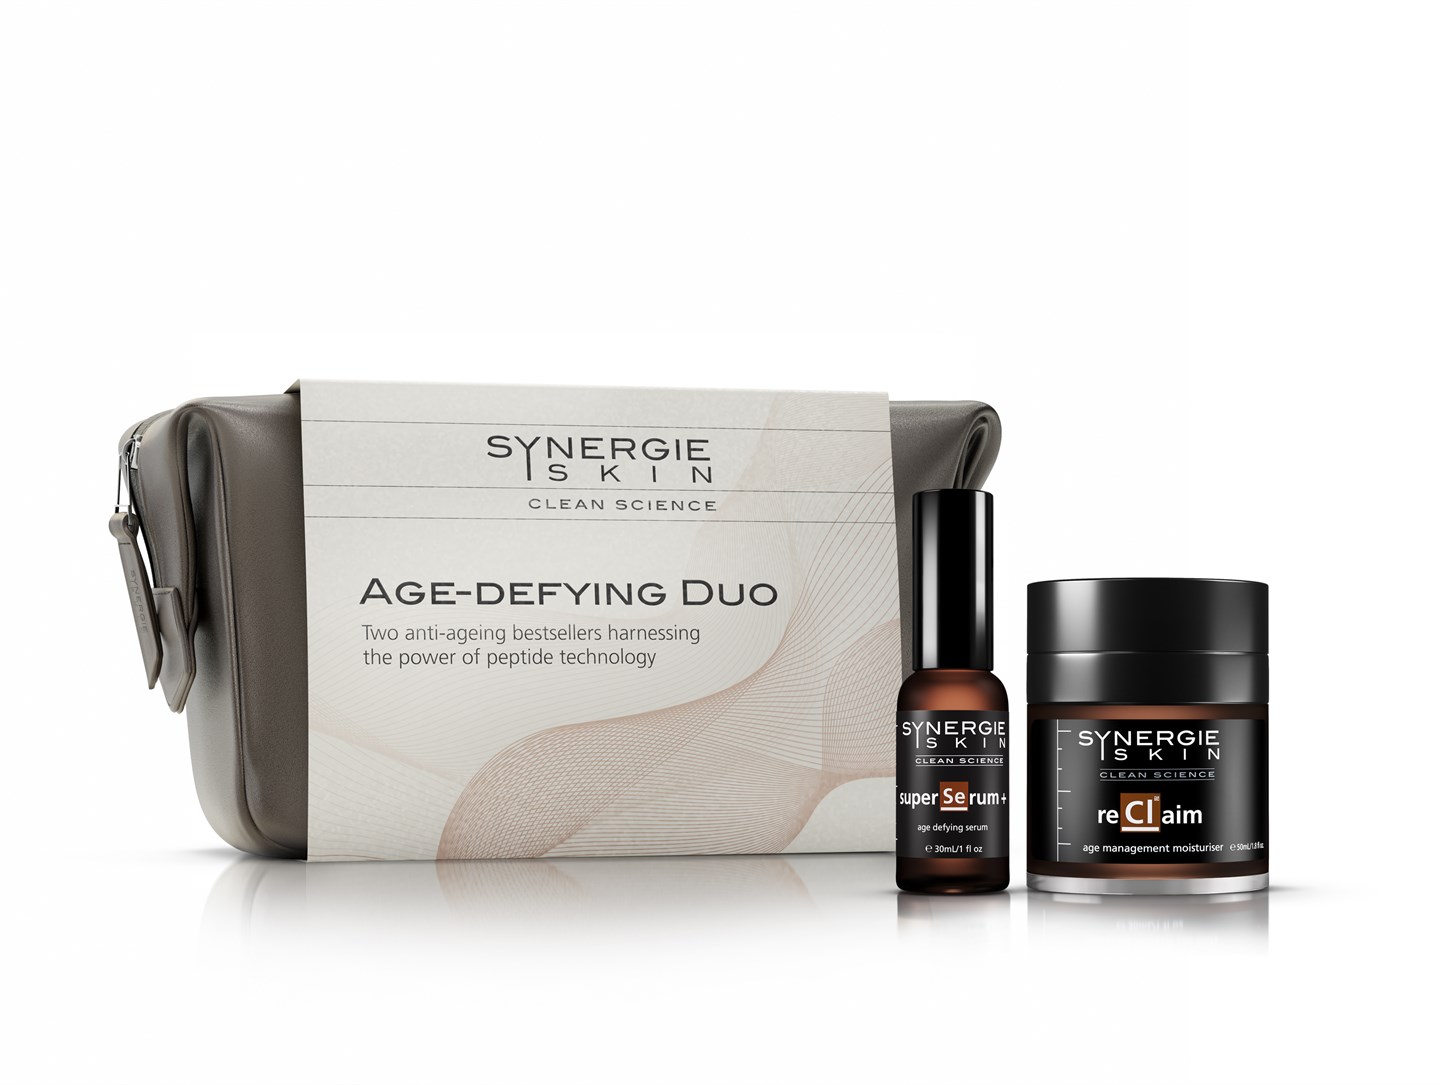 Synergie Skin Age-Defying Duo